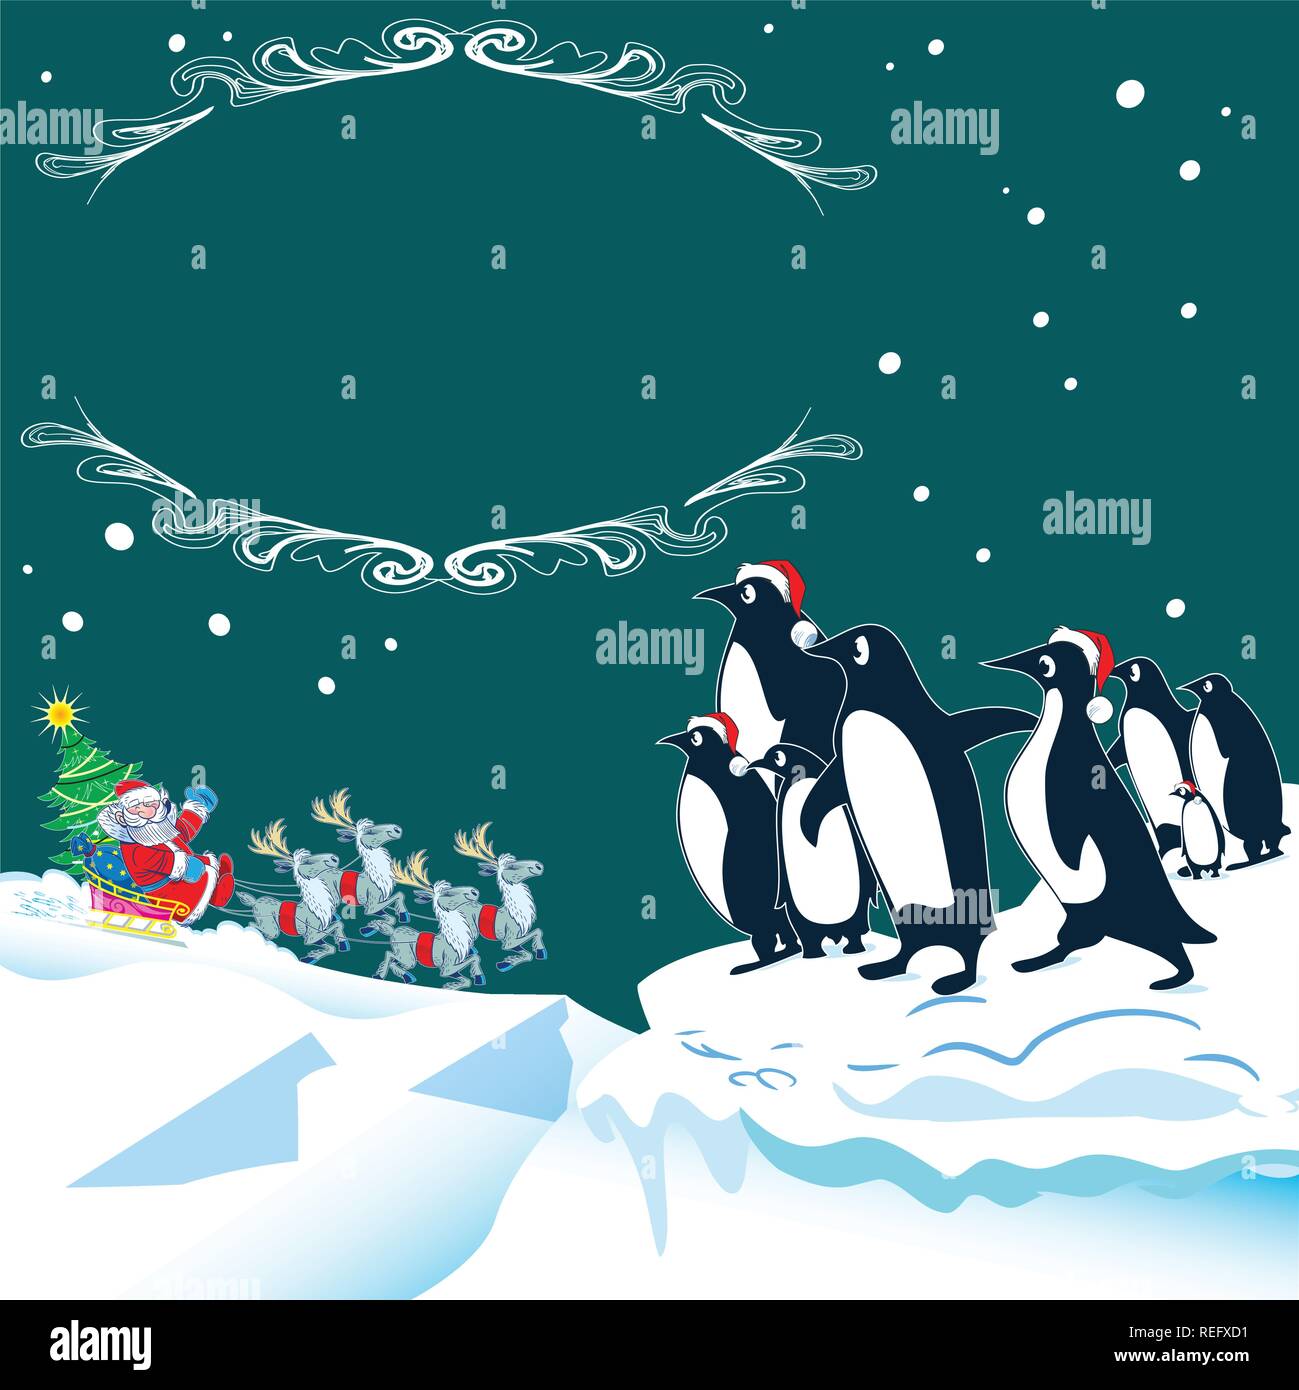 The illustration shows how the penguins in the north meet Santa Claus on Christmas Eve. Santa Claus rides in sled reindeer with gifts. Stock Vector